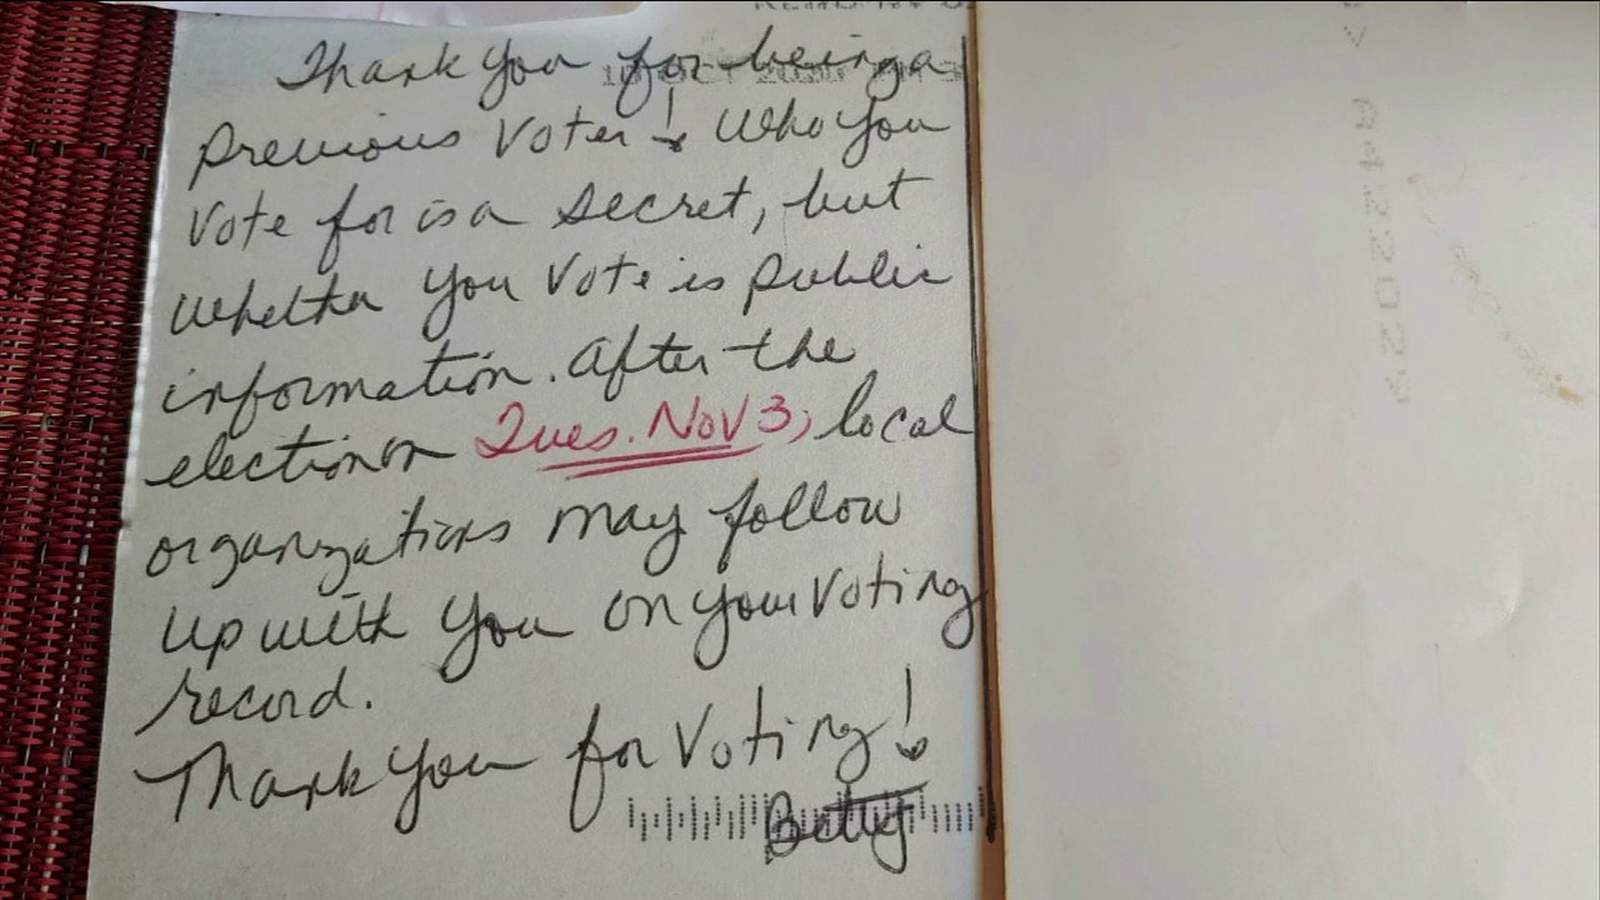 Putnam County voter says she received ‘intimidating’ postcard